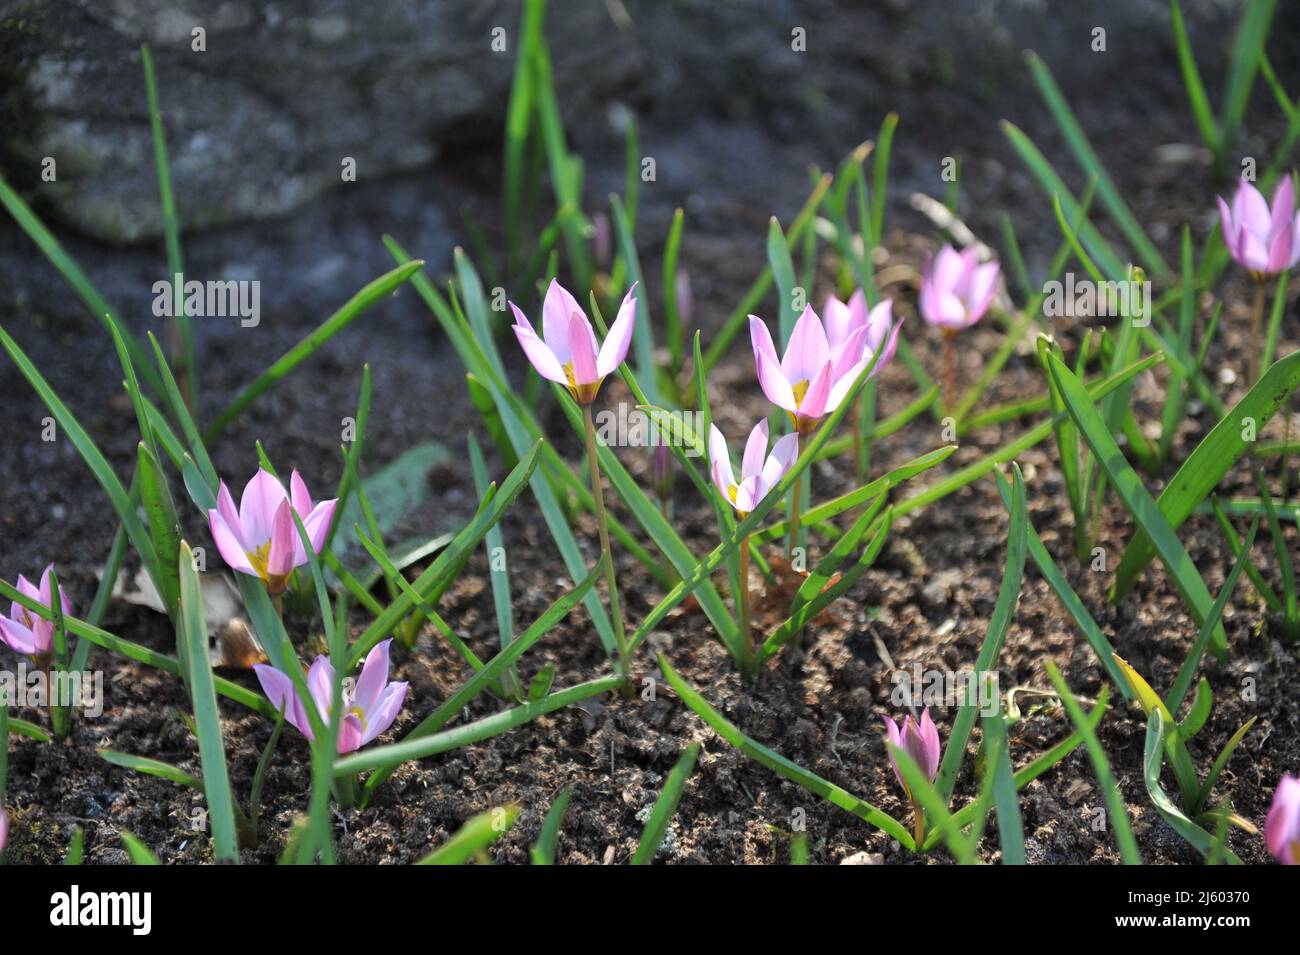 Violet-pink Miscellaneous low-growing tulips (Tulipa humilis) Violacea bloom in a garden in March Stock Photo